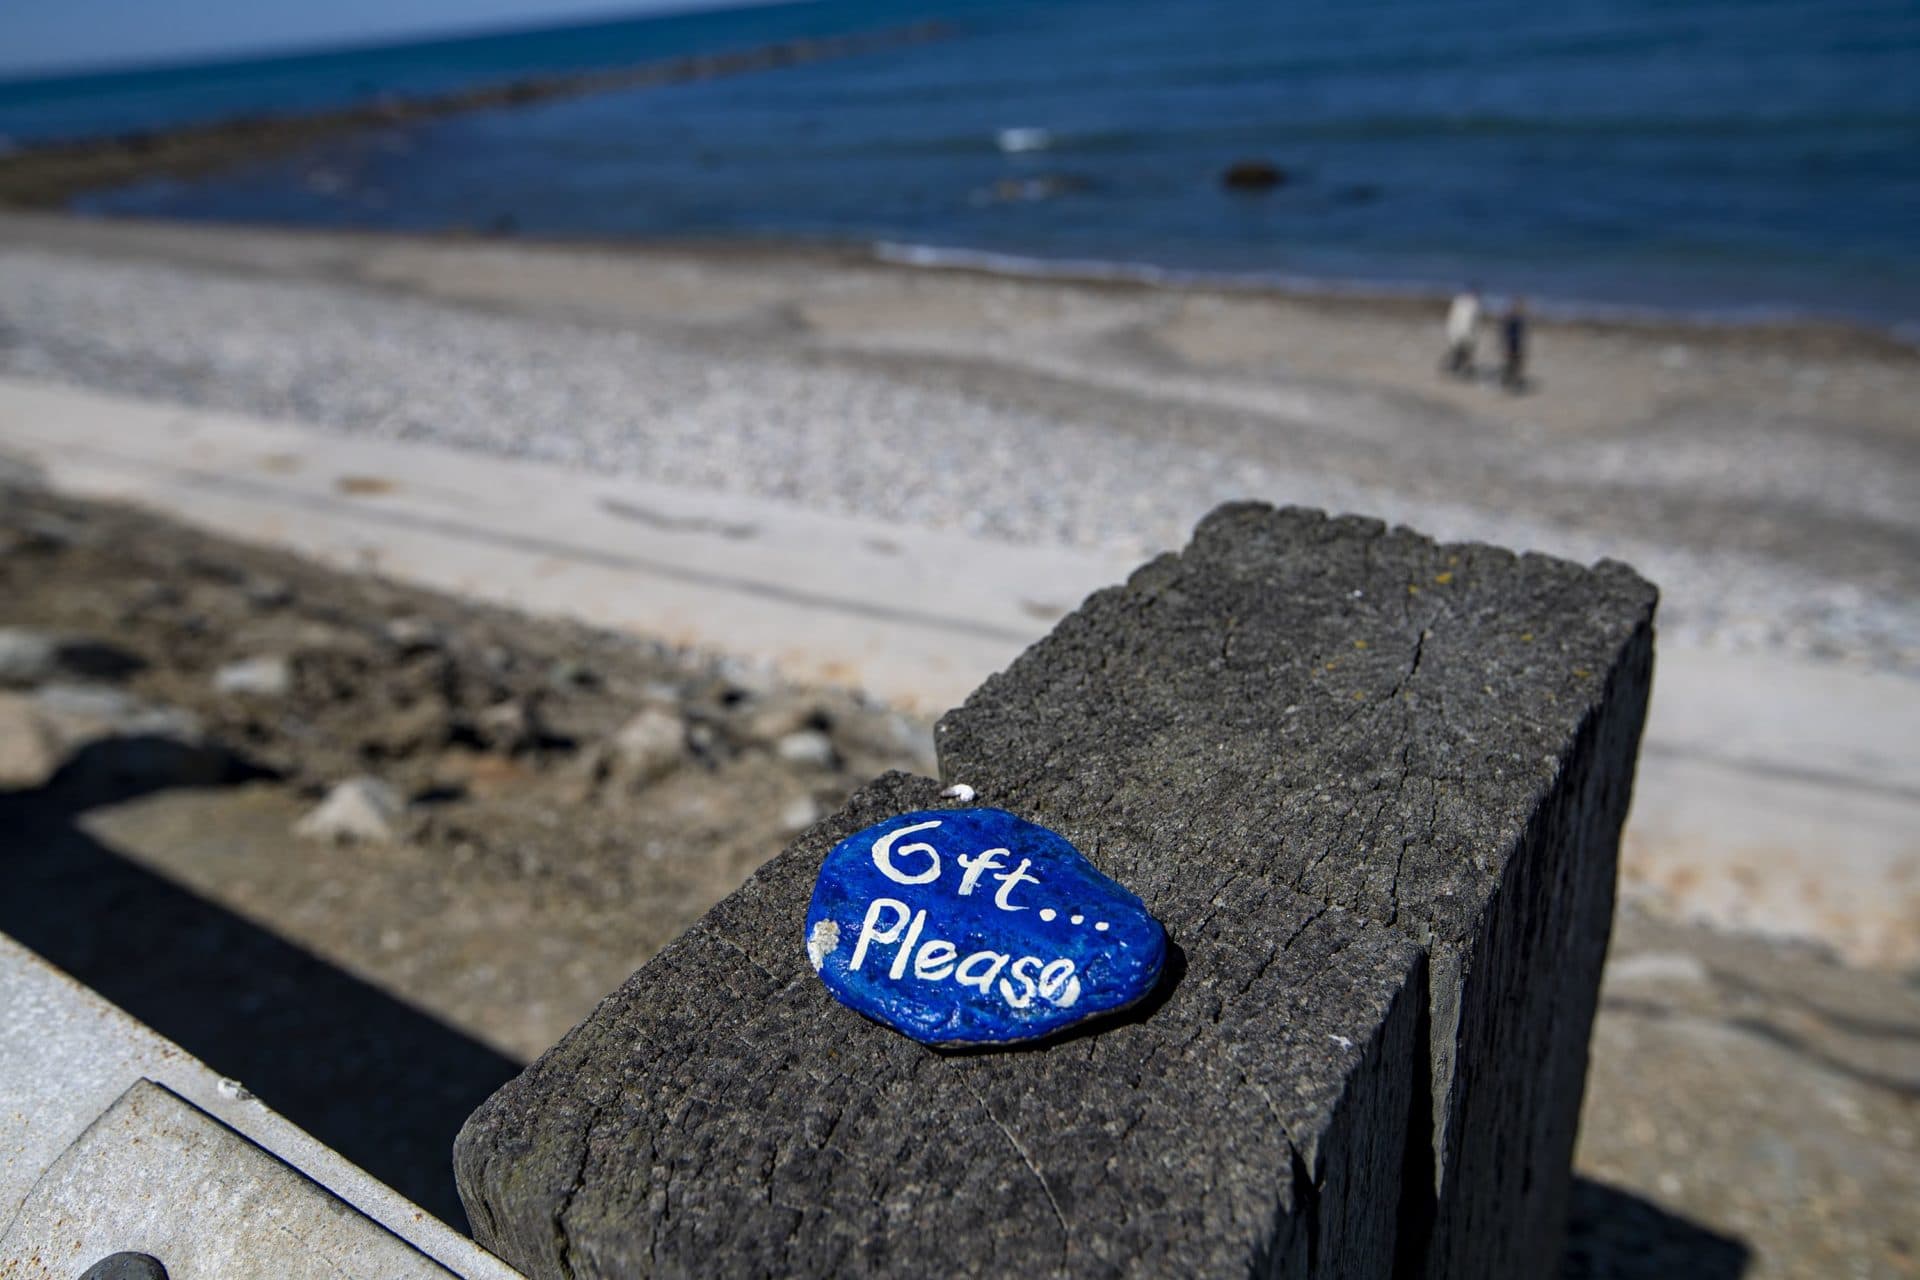 Brightly painted rocks with inspirational messages inscibed on them regarding the Coronavirus pandemic are left on top of the guardrails at a virtually empty Brant Rock Beach in Marshfield. (Jesse Costa/WBUR)